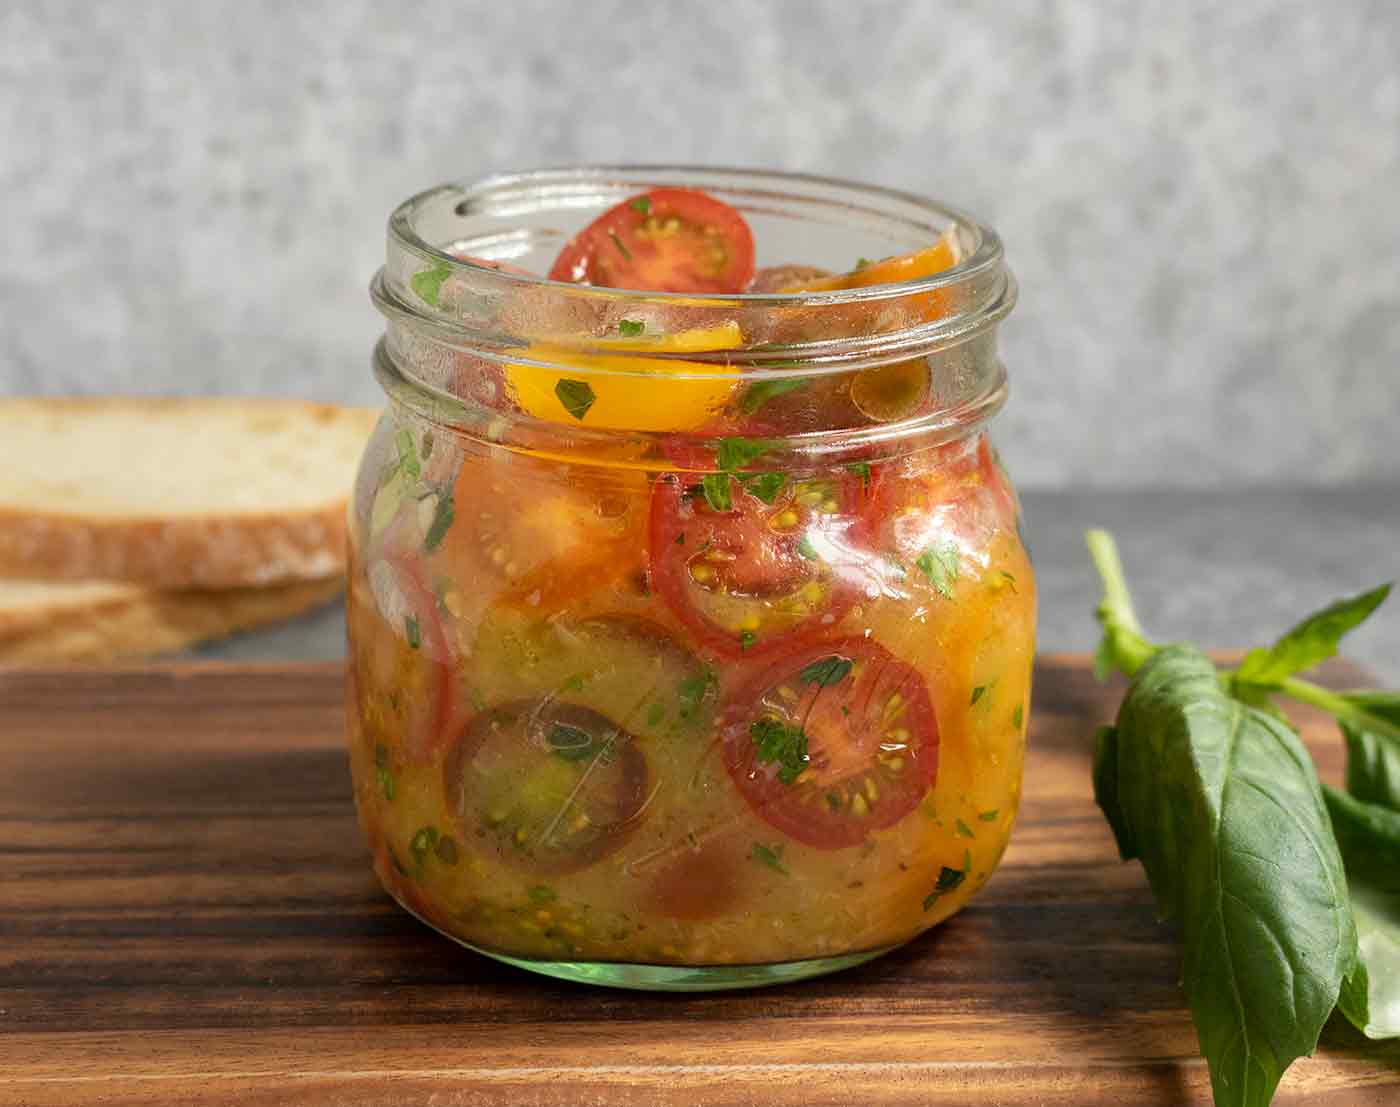 A mason jar filled with sliced cherry tomatoes in an olive oil vinaigrette.